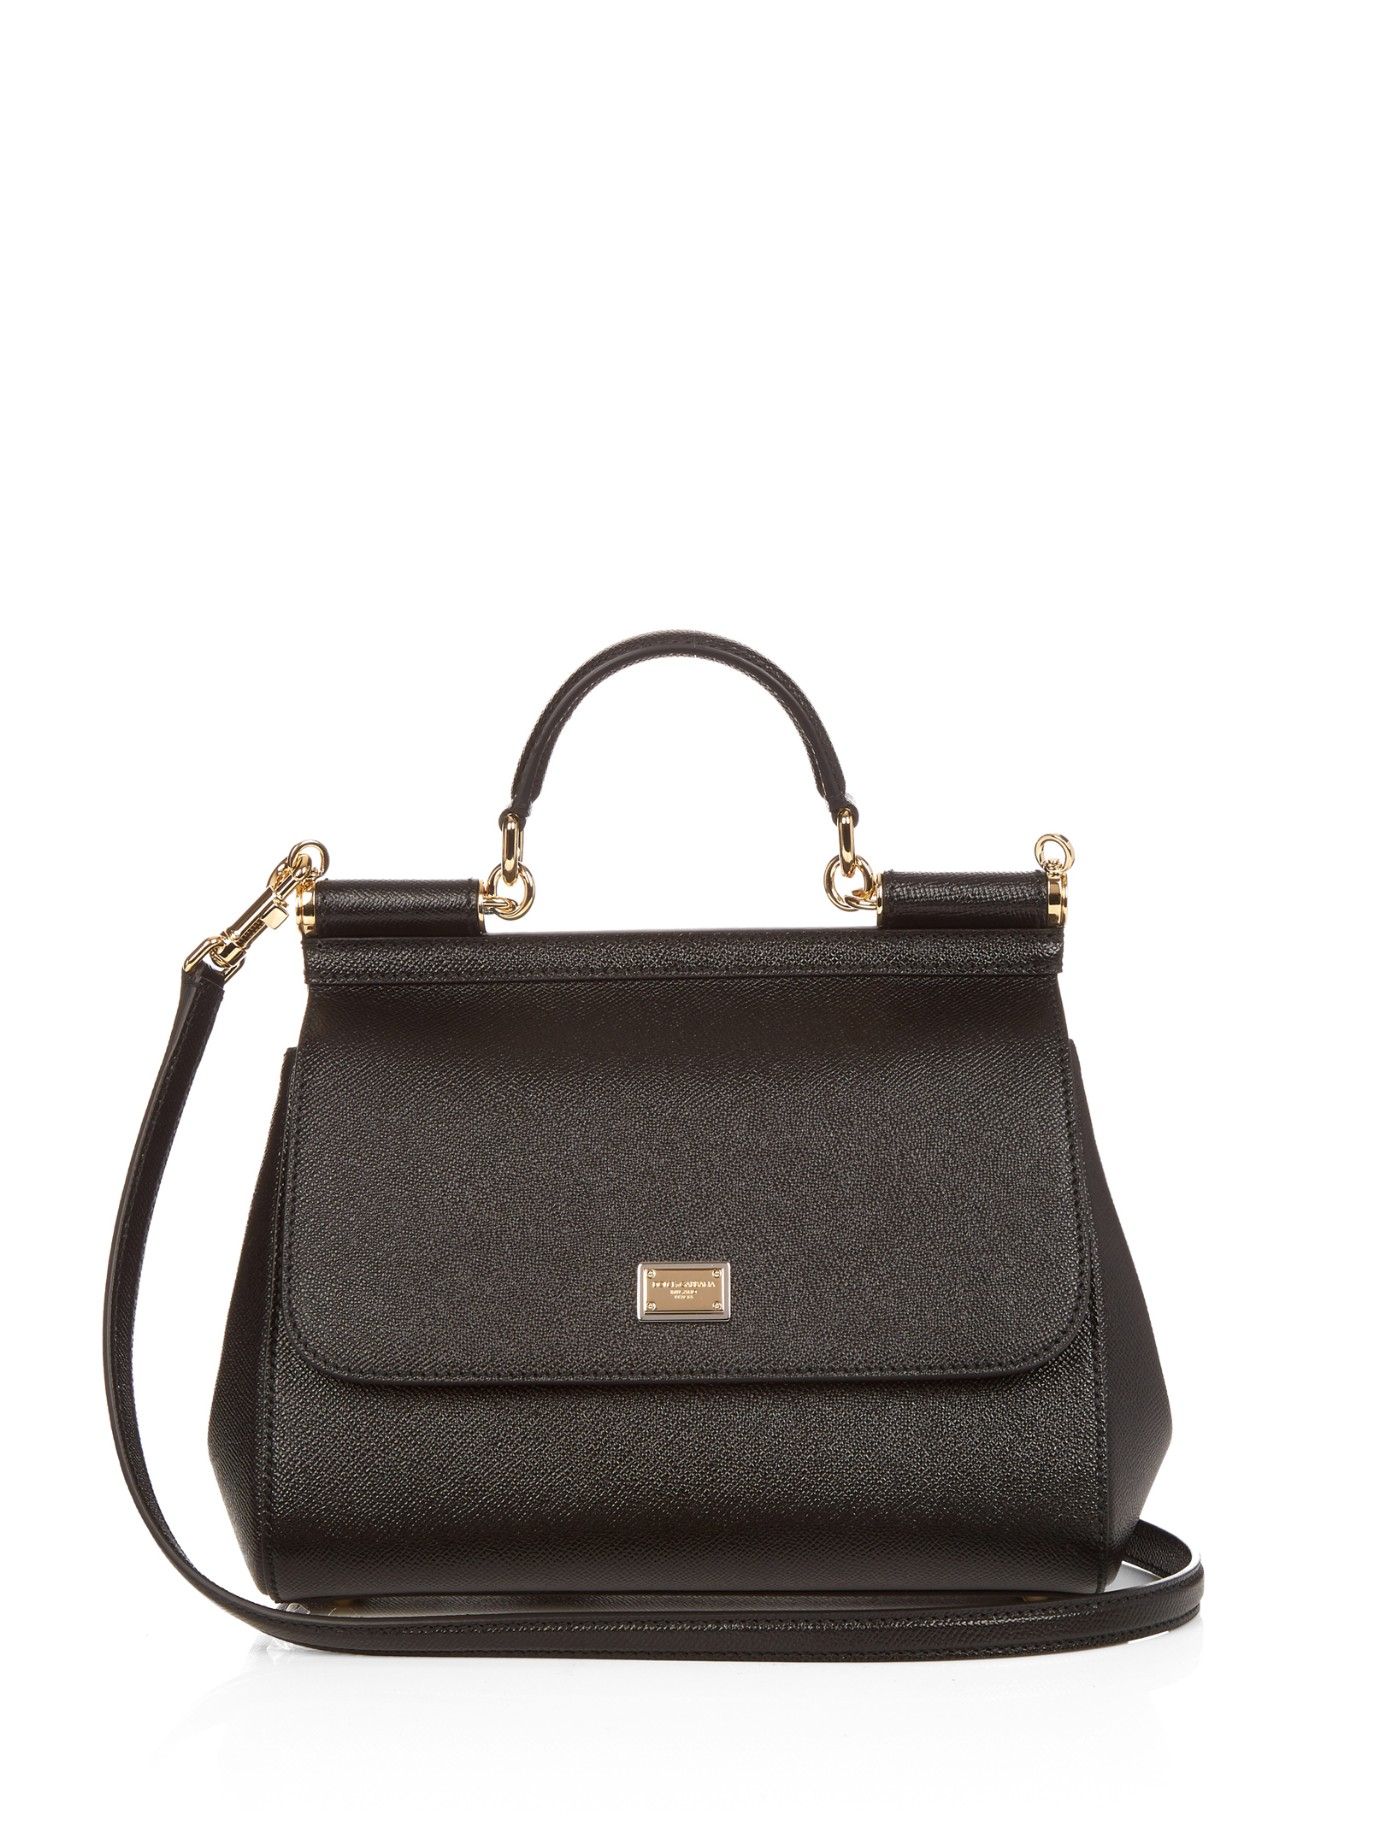 Lyst - Dolce & gabbana Sicily Small Leather Tote in Black